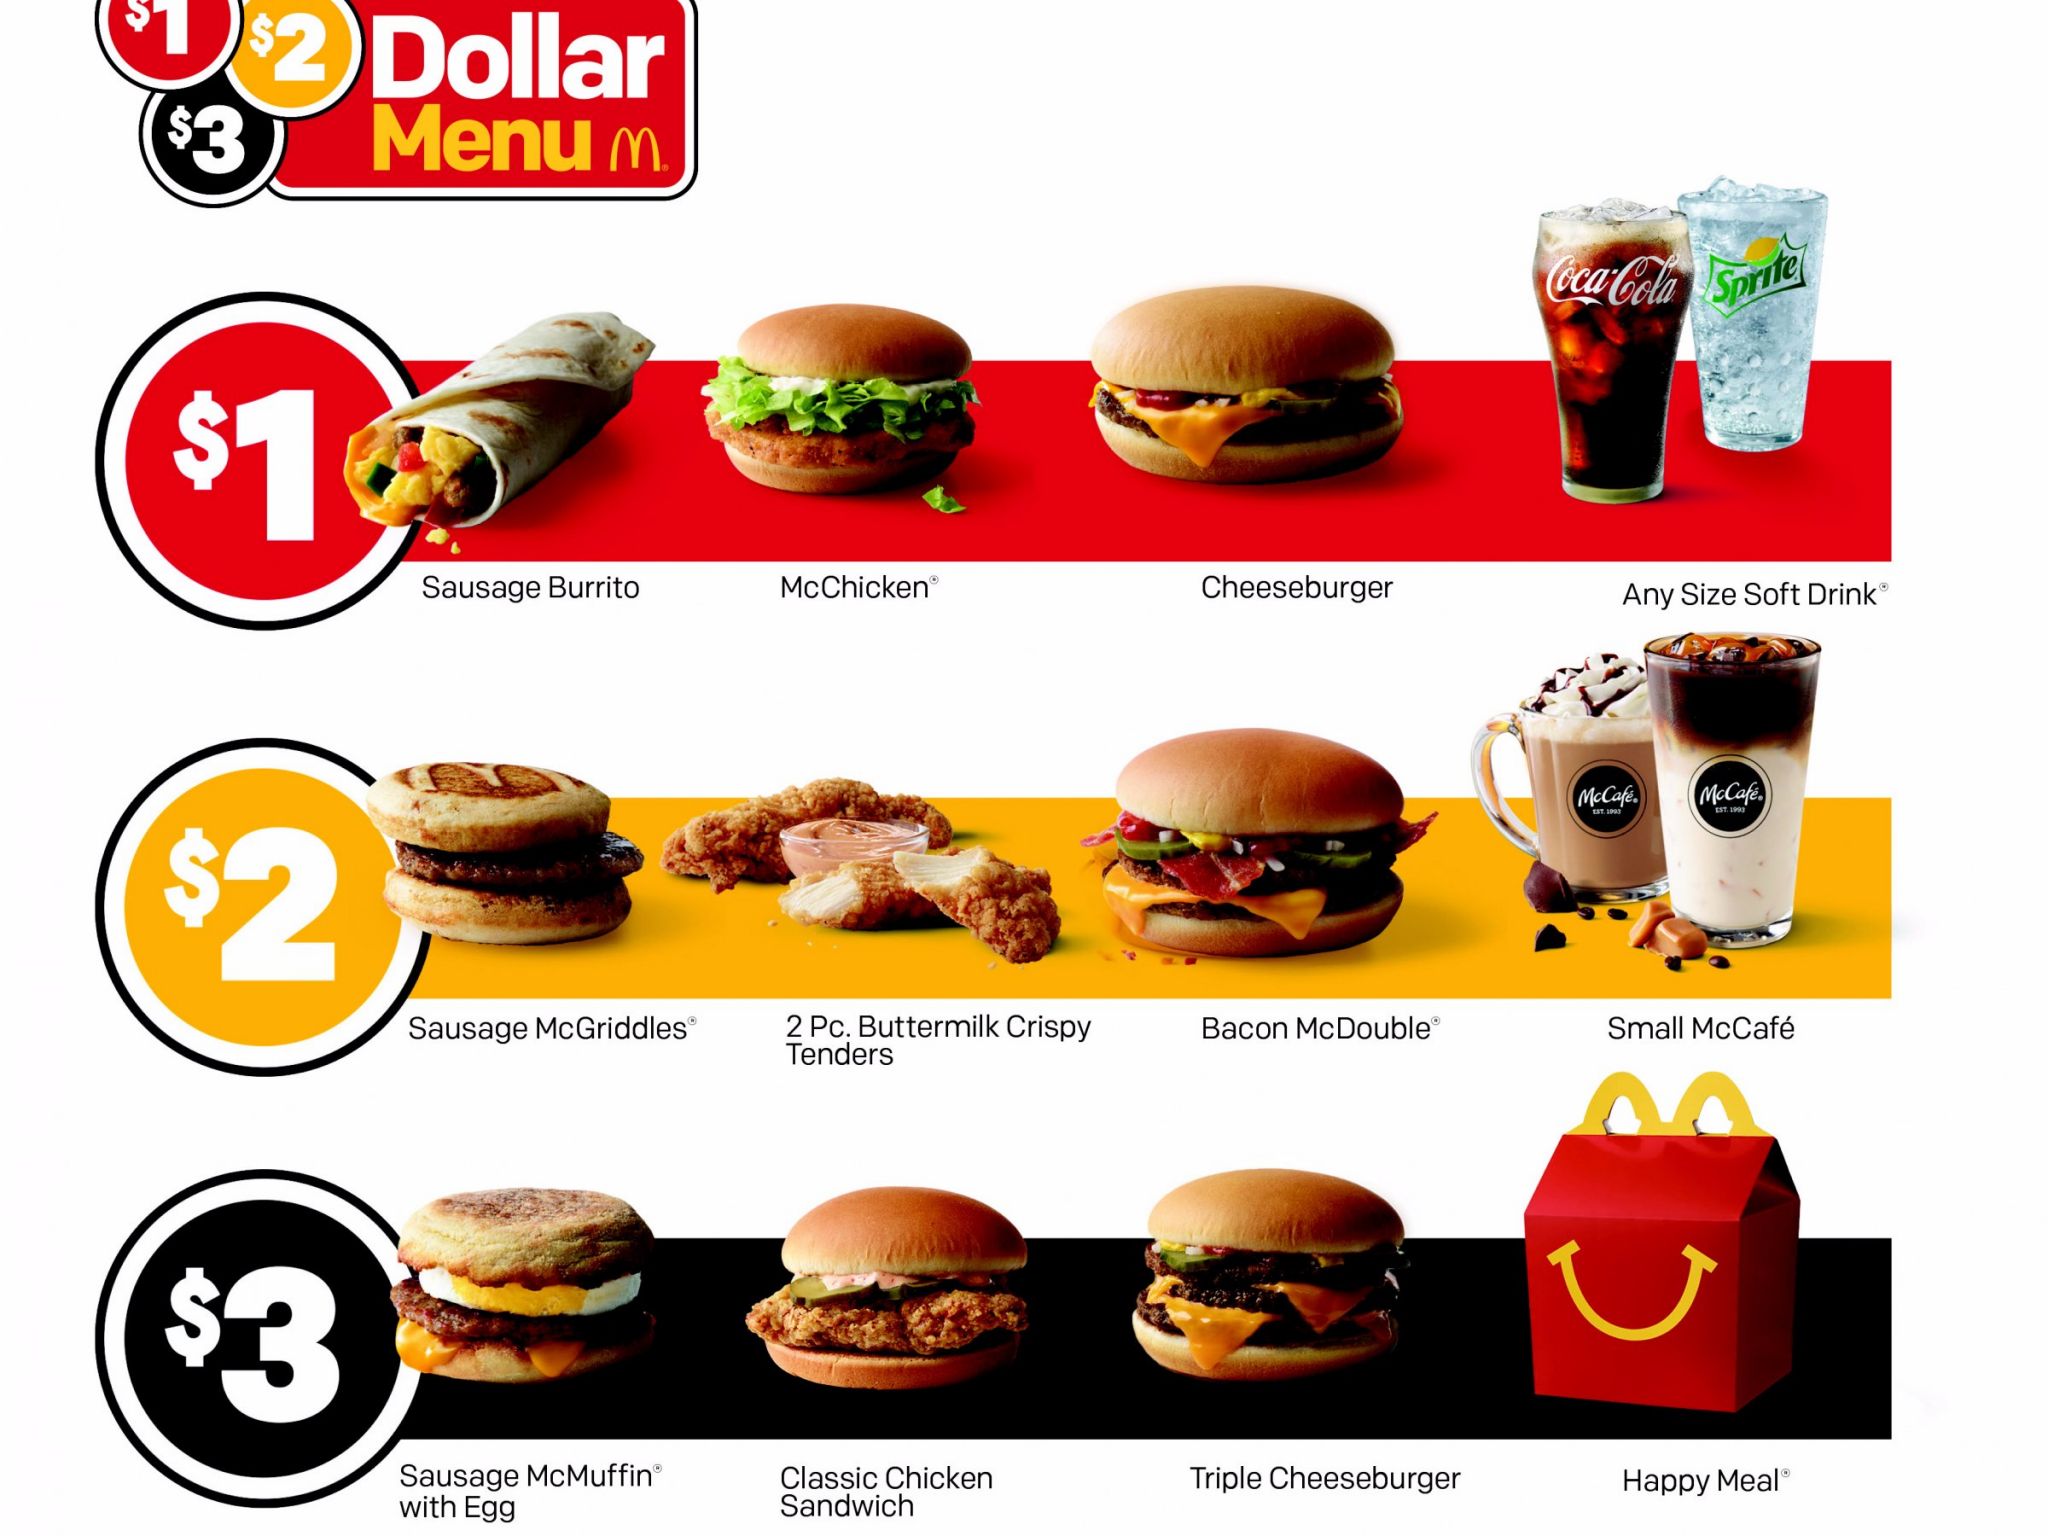 McDonald's Dollar Menu is back — here's what's on it - SFGate